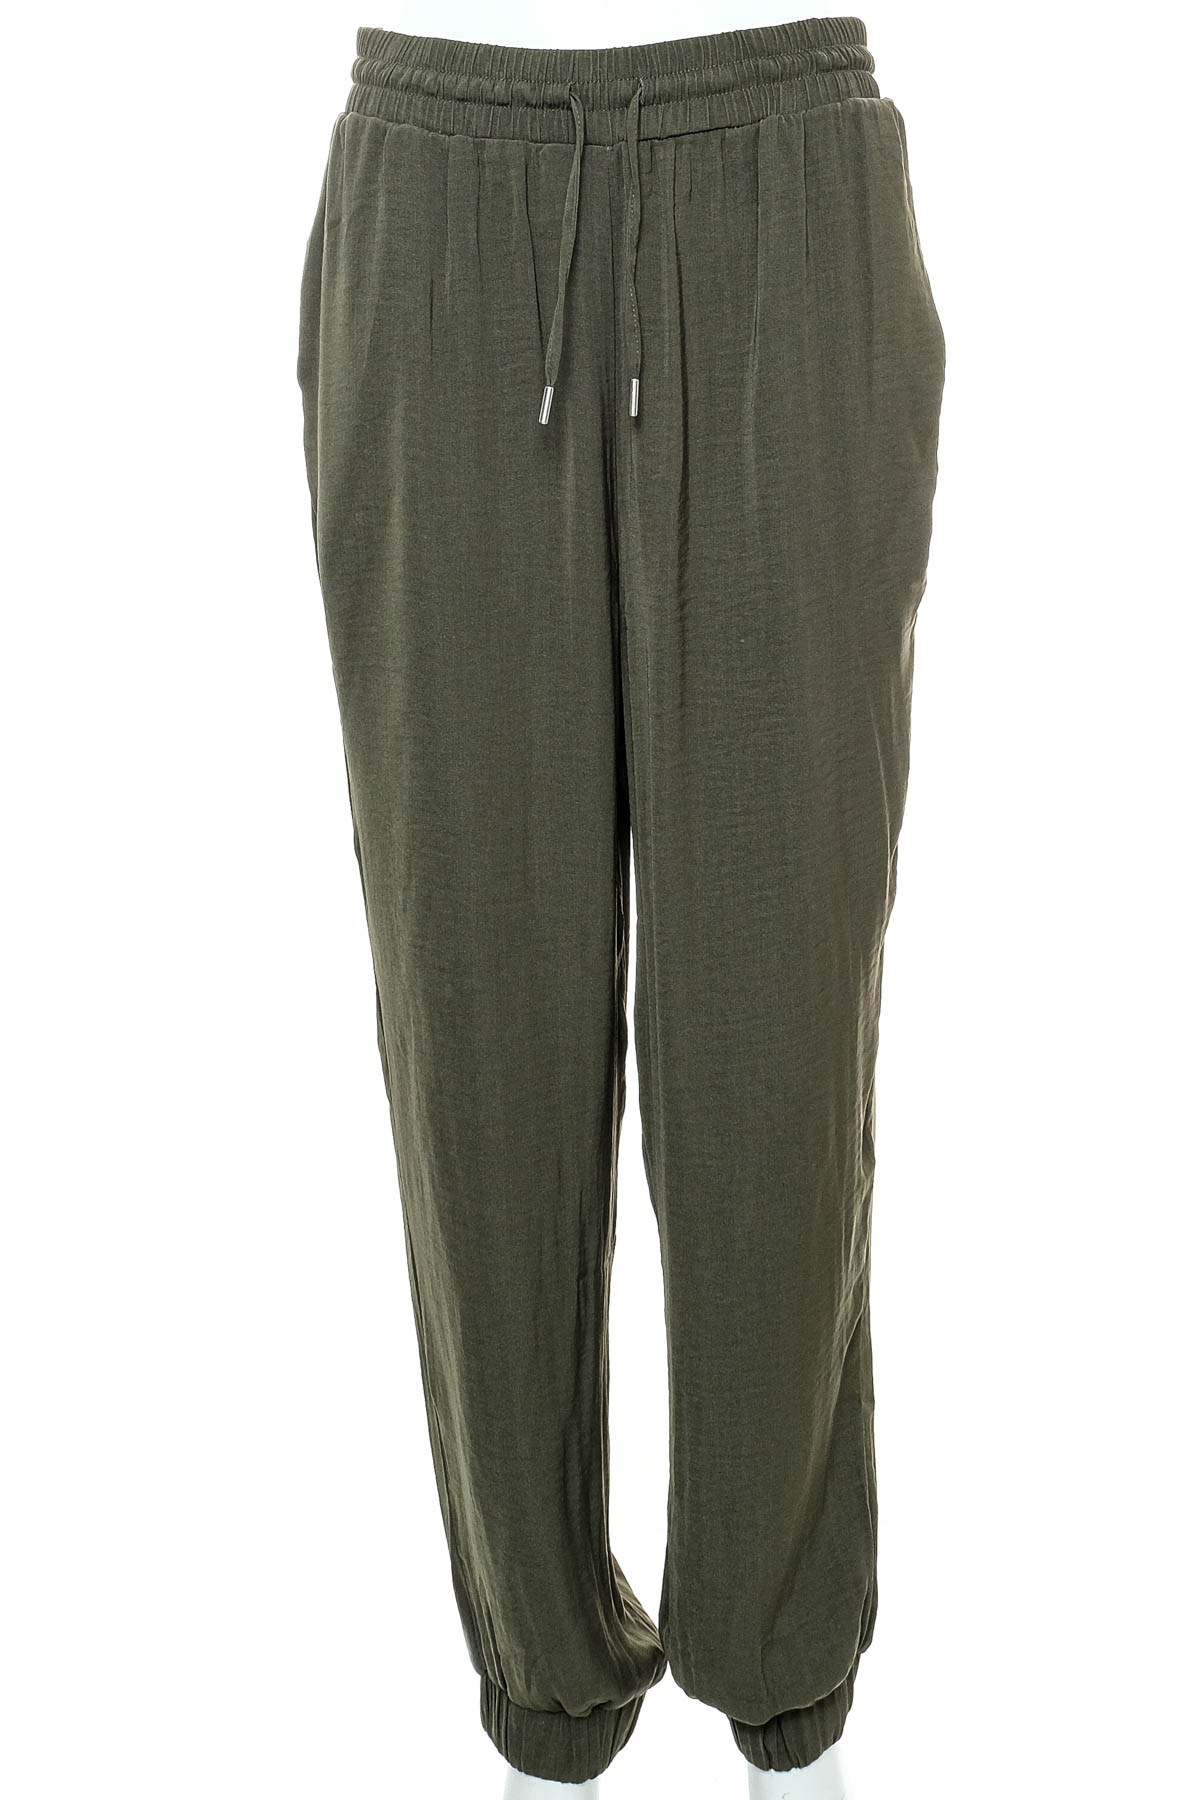 Women's trousers - ABOUT YOU - 0